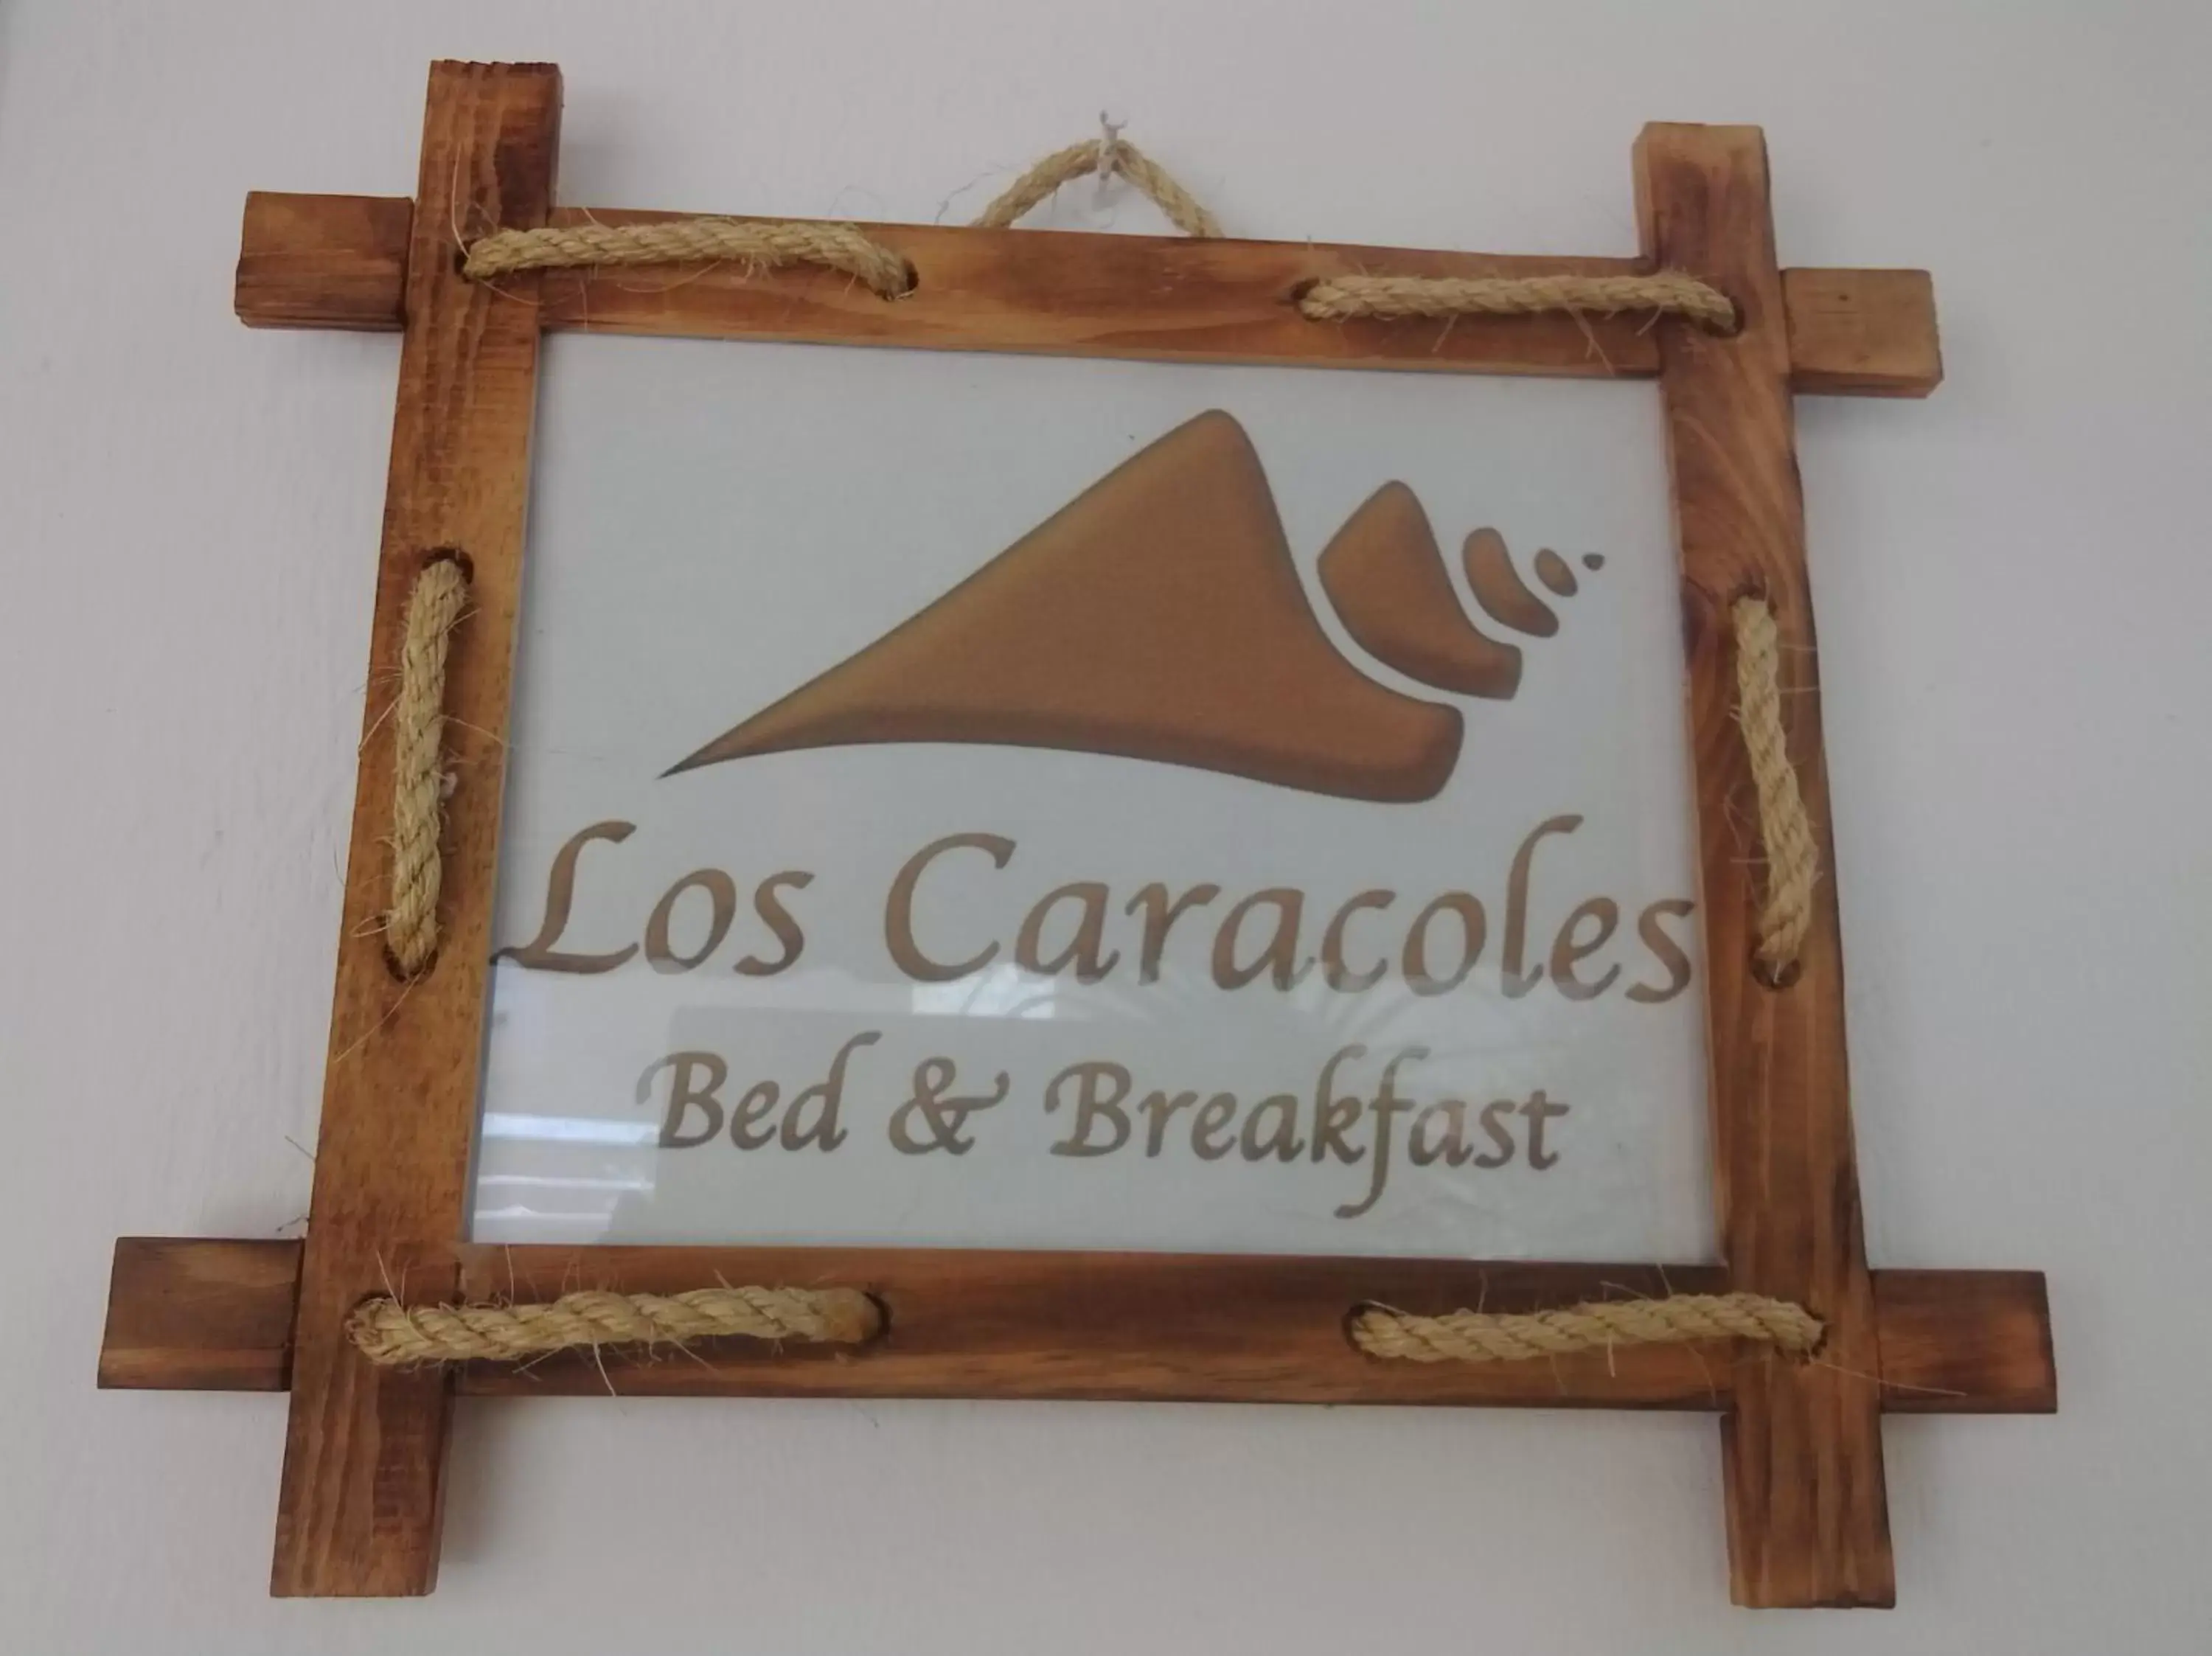 Property logo or sign, Logo/Certificate/Sign/Award in Los Caracoles Bed & Breakfast